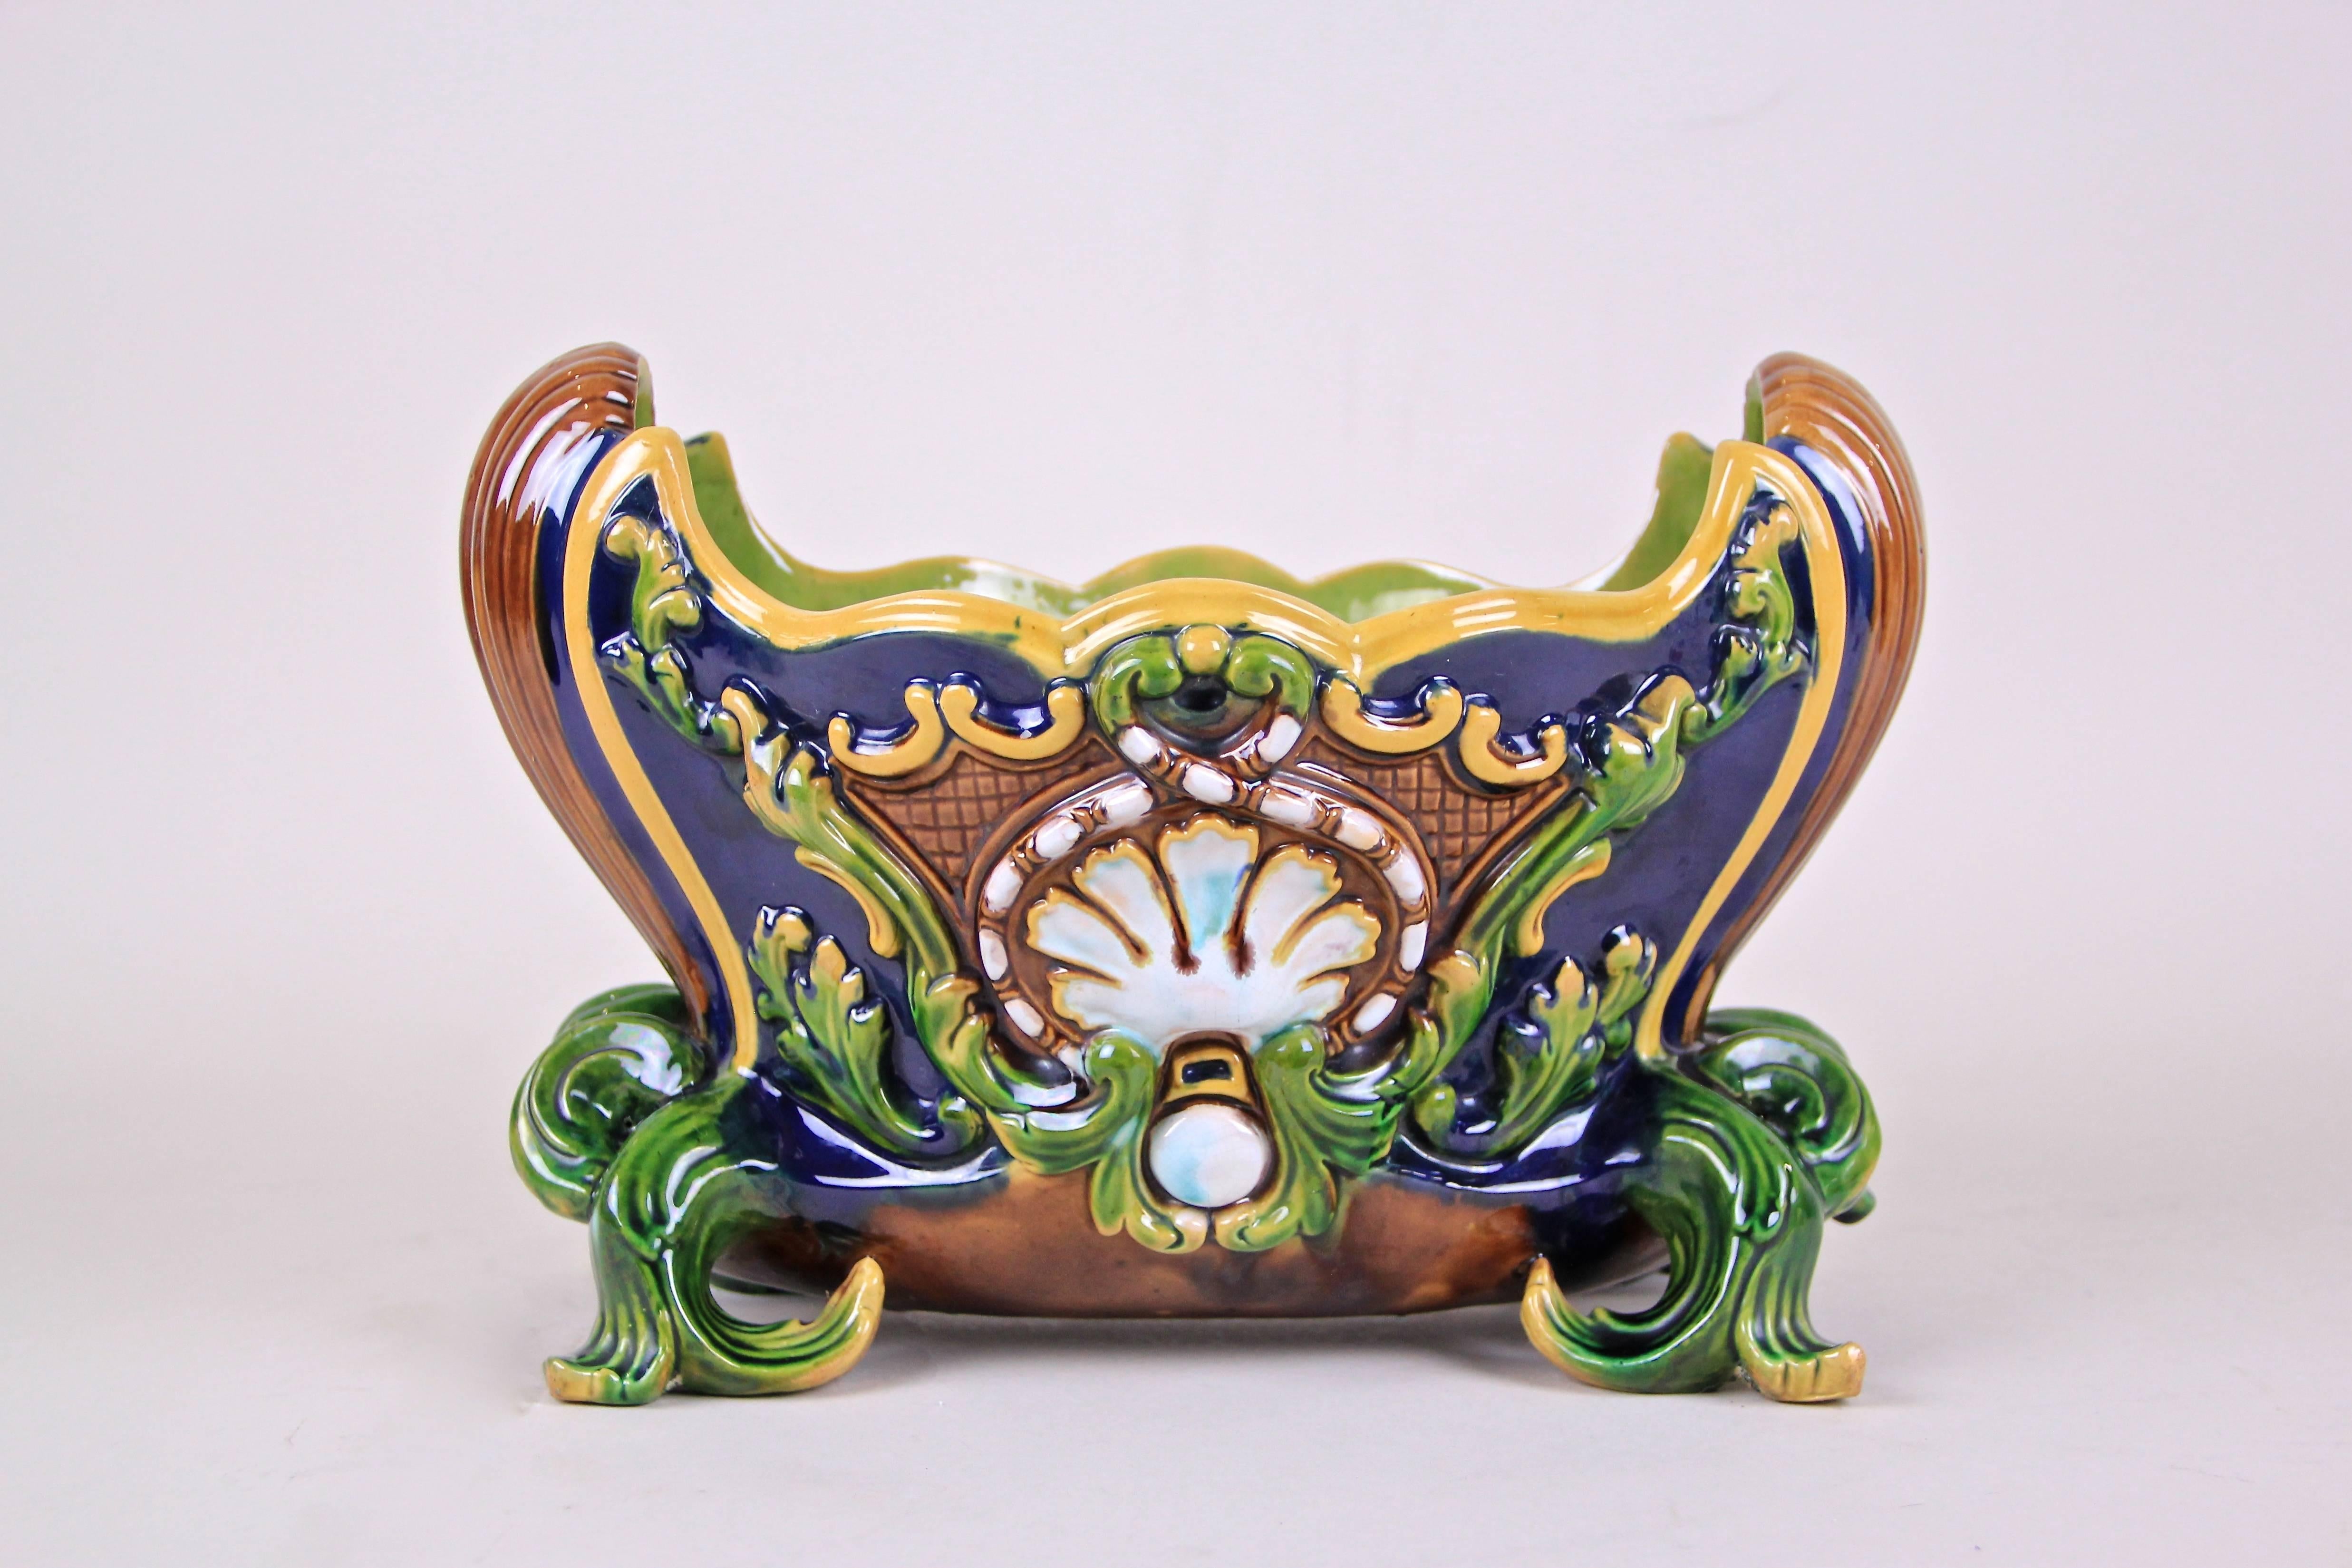 Charming Majolica centerpiece or Jardinière from the renowned company of Wilhelm Schiller & Son in Bohemia from circa 1890. This fantastic designed piece of majolica shows a gorgeous floral design in combination with great color compositions from